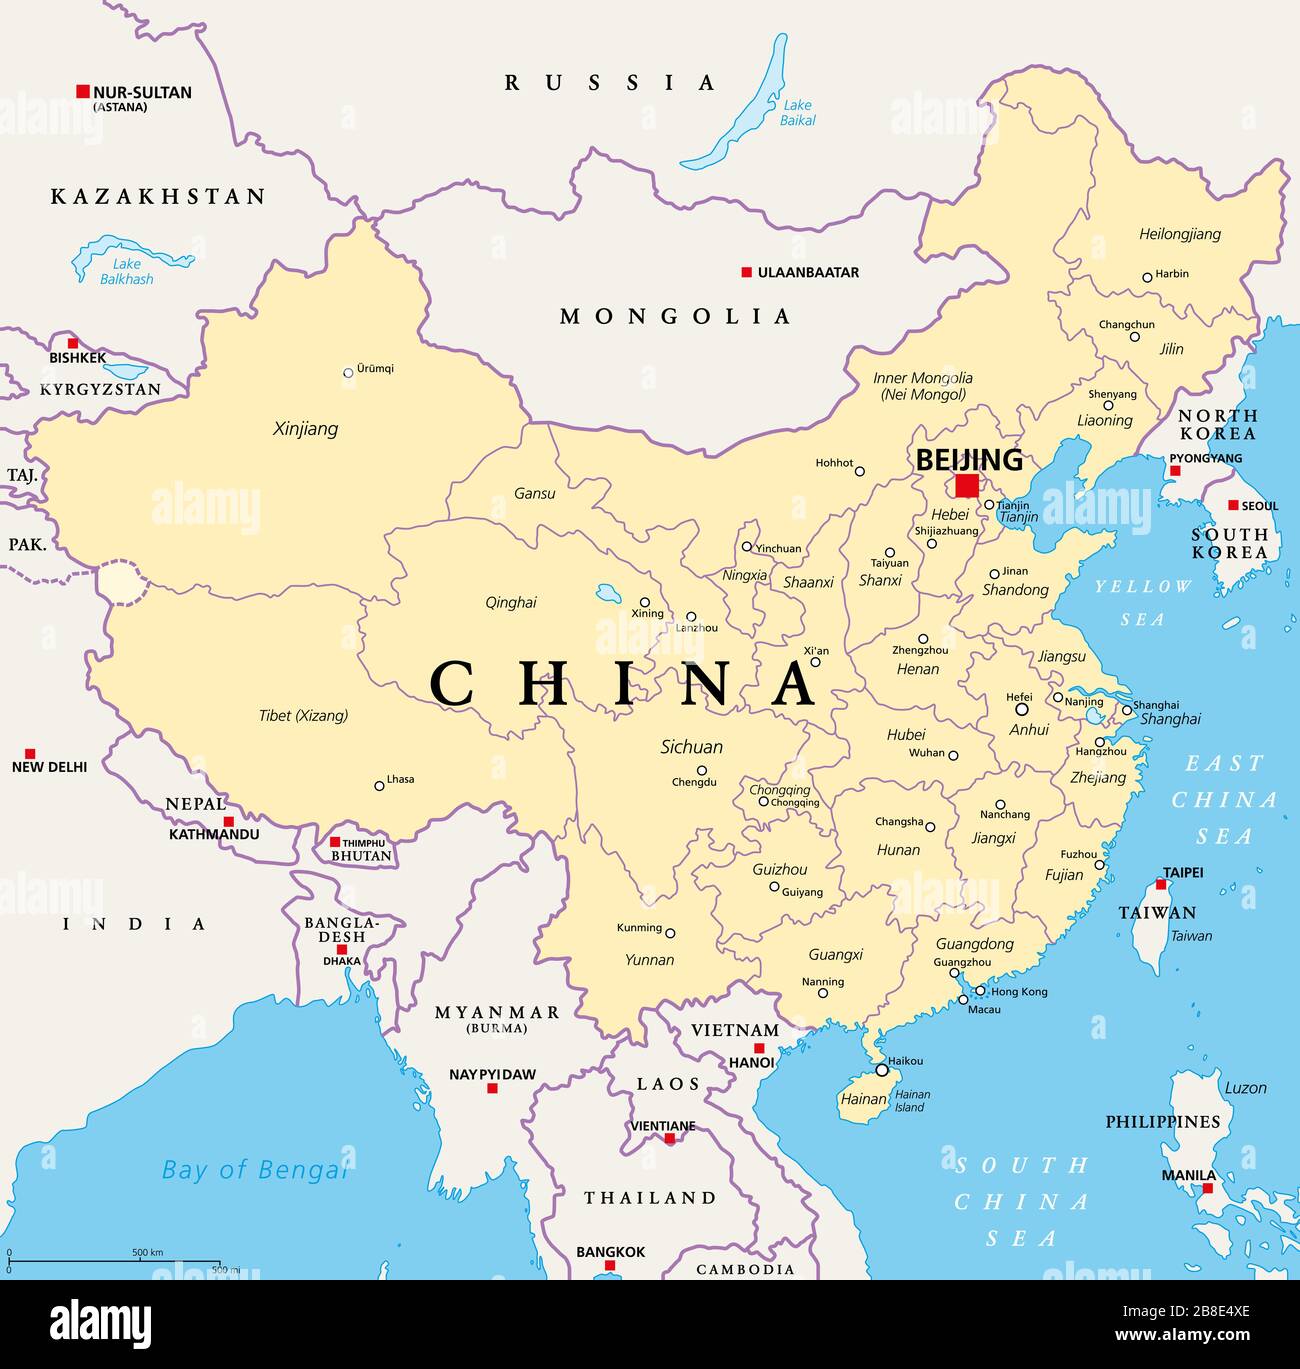 A Map Of China Locating The Ancient Capital Of Nanjing Image Courtesy Download Scientific Diagram